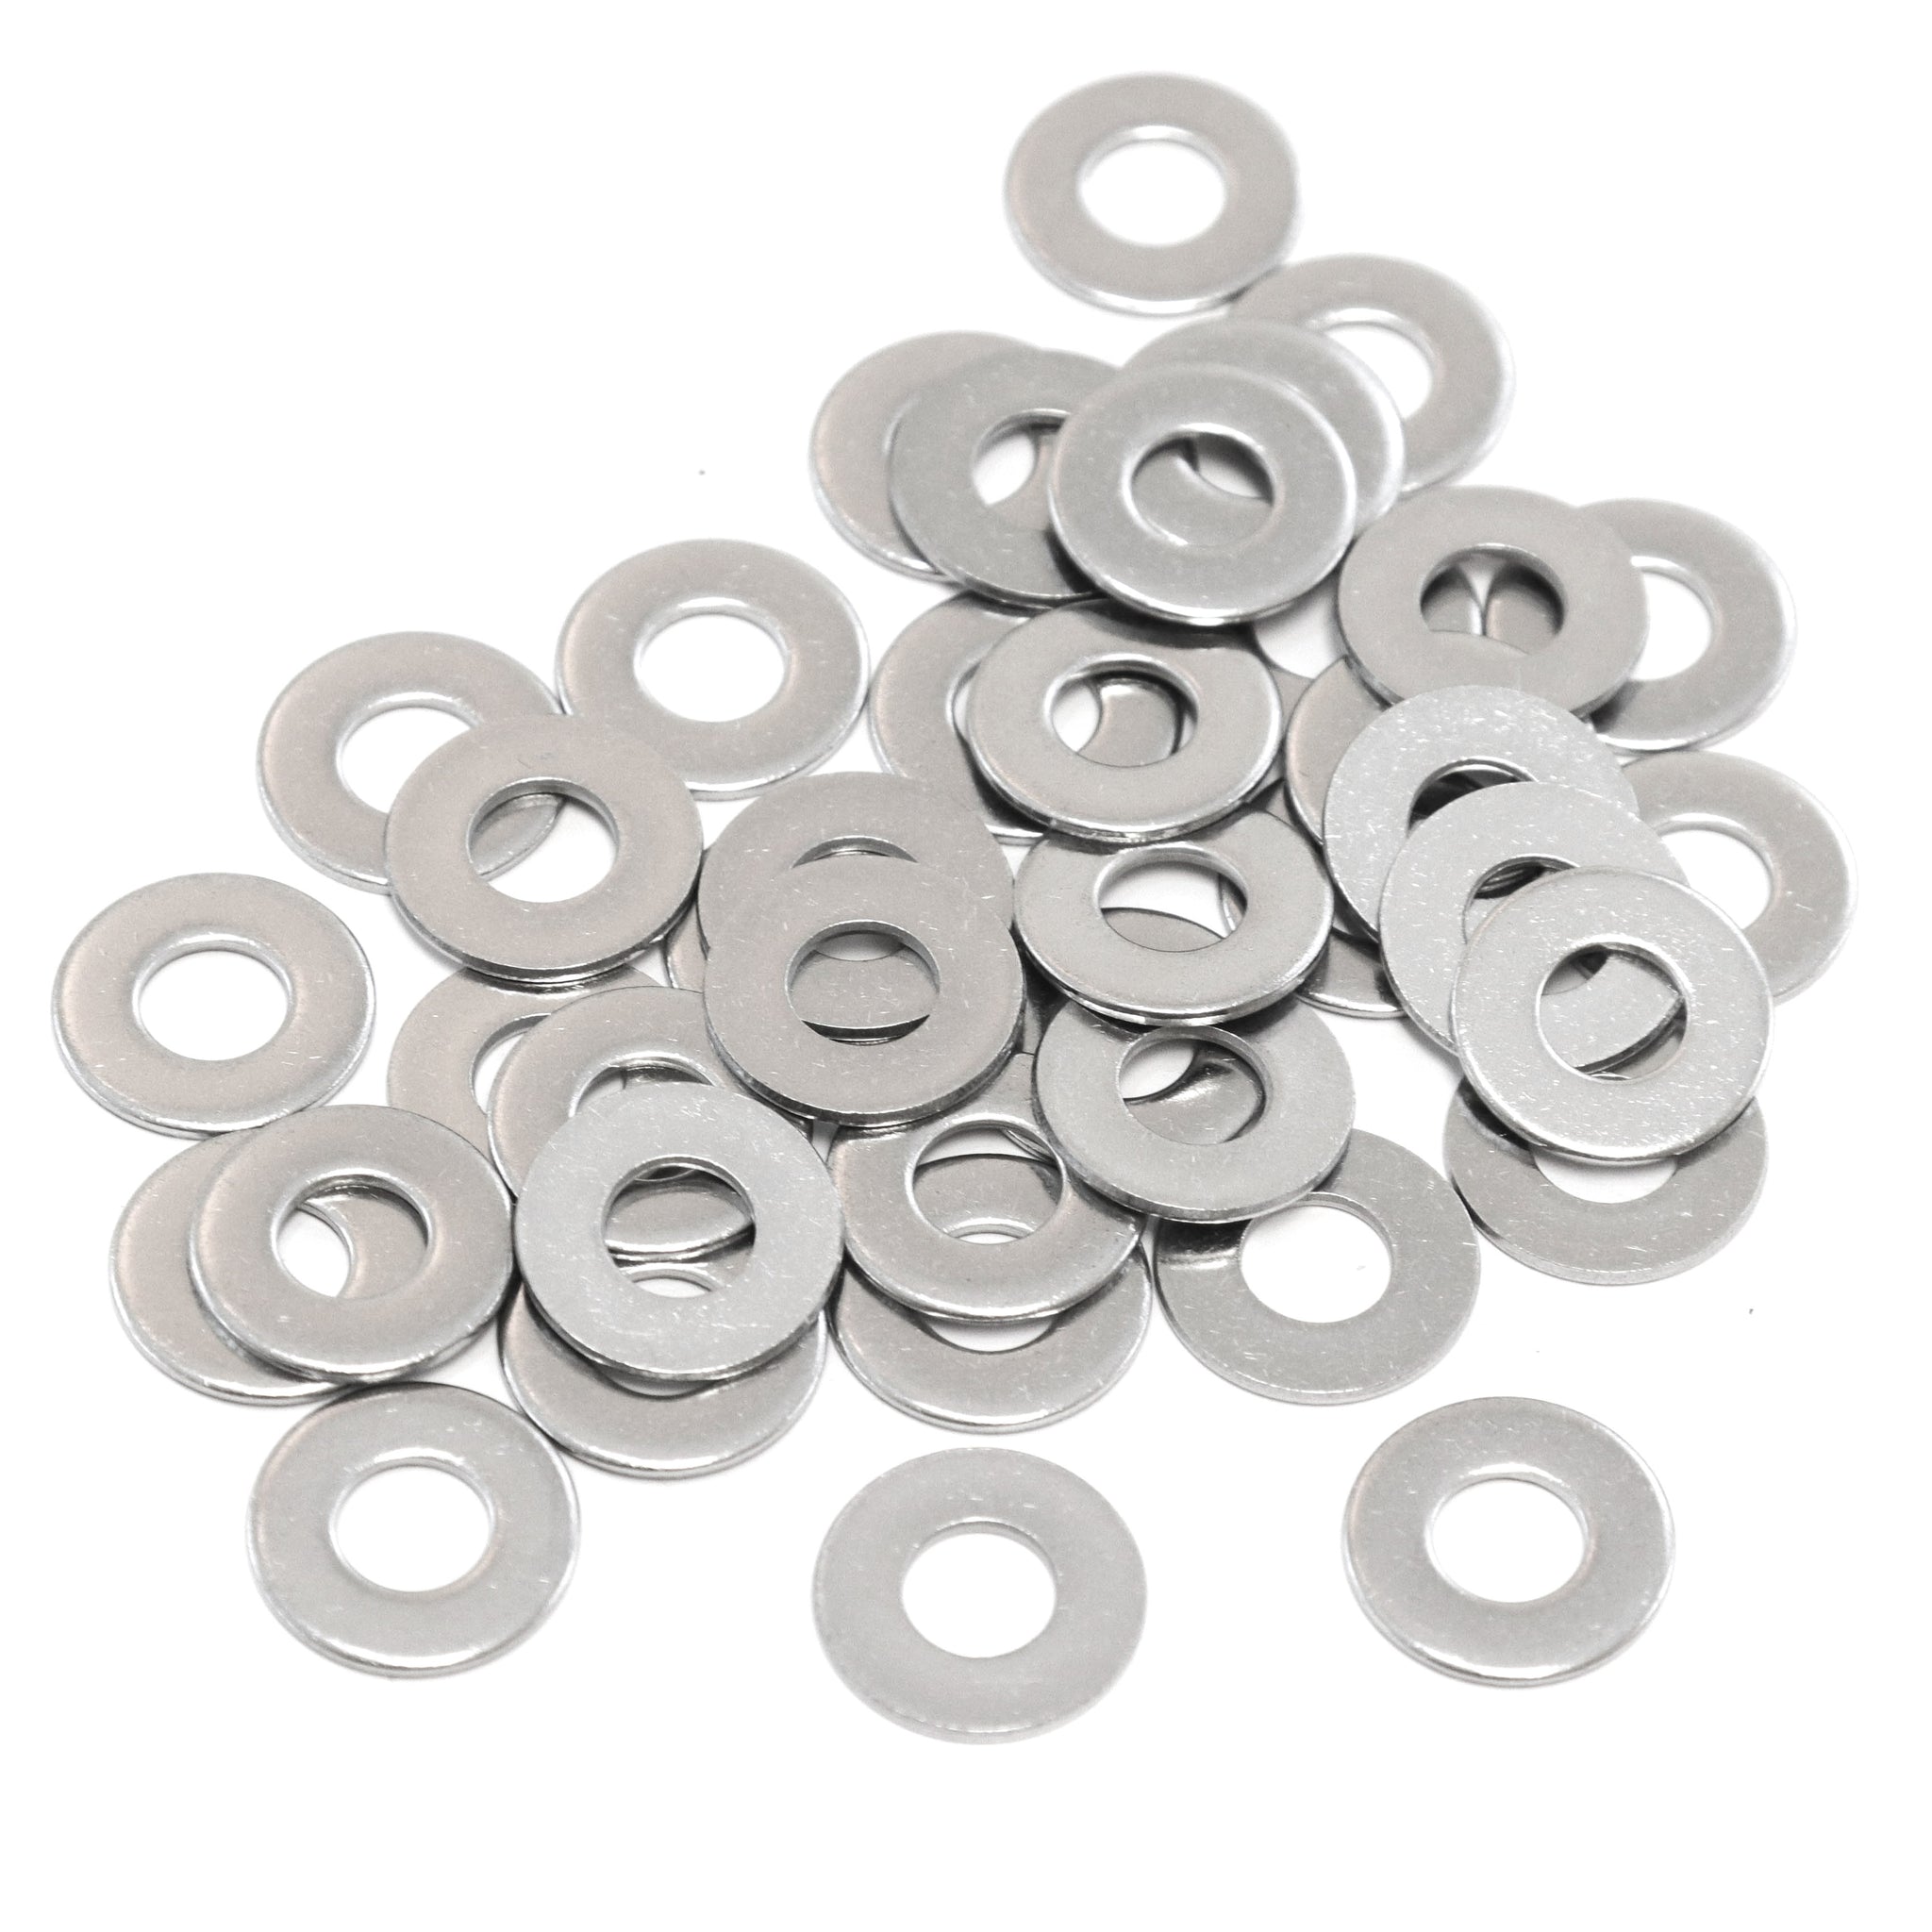 Red Hound Auto 40 Flat Standard Washers Set Fits 1/4 Inch .281 Inch ID Hole Size, .625 Inch OD for 304 SS Stainless Steel Corrosion Resistant